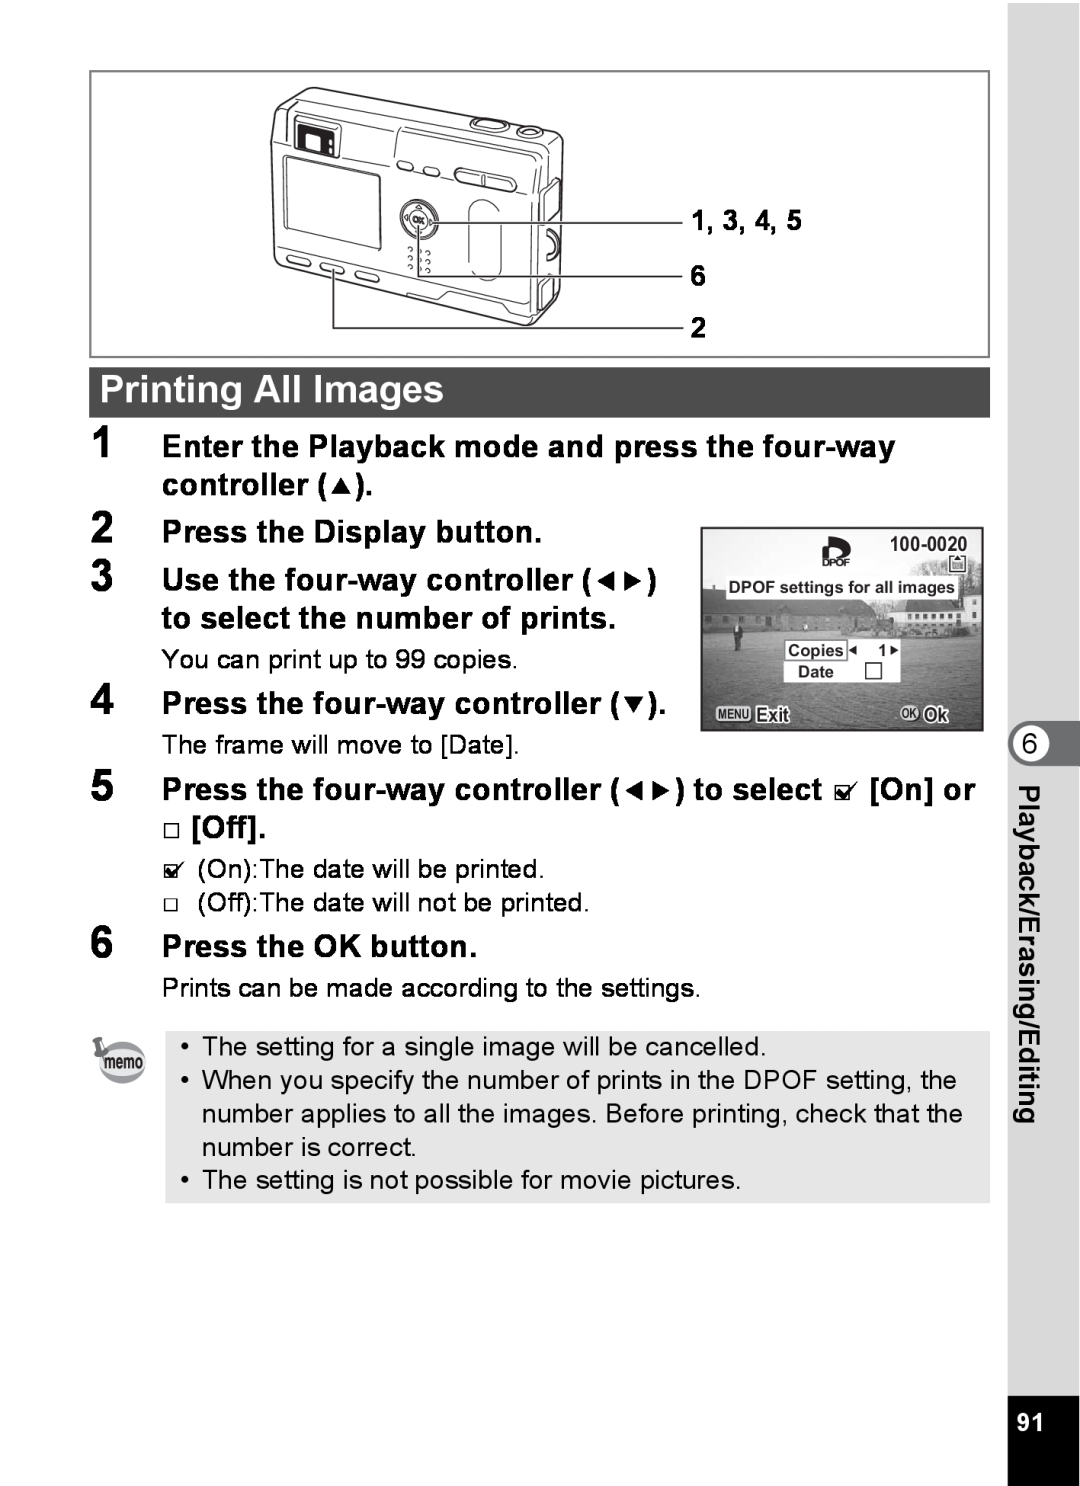 Pentax S4 manual Printing All Images, Enter the Playback mode and press the four-way controller, Press the OK button 